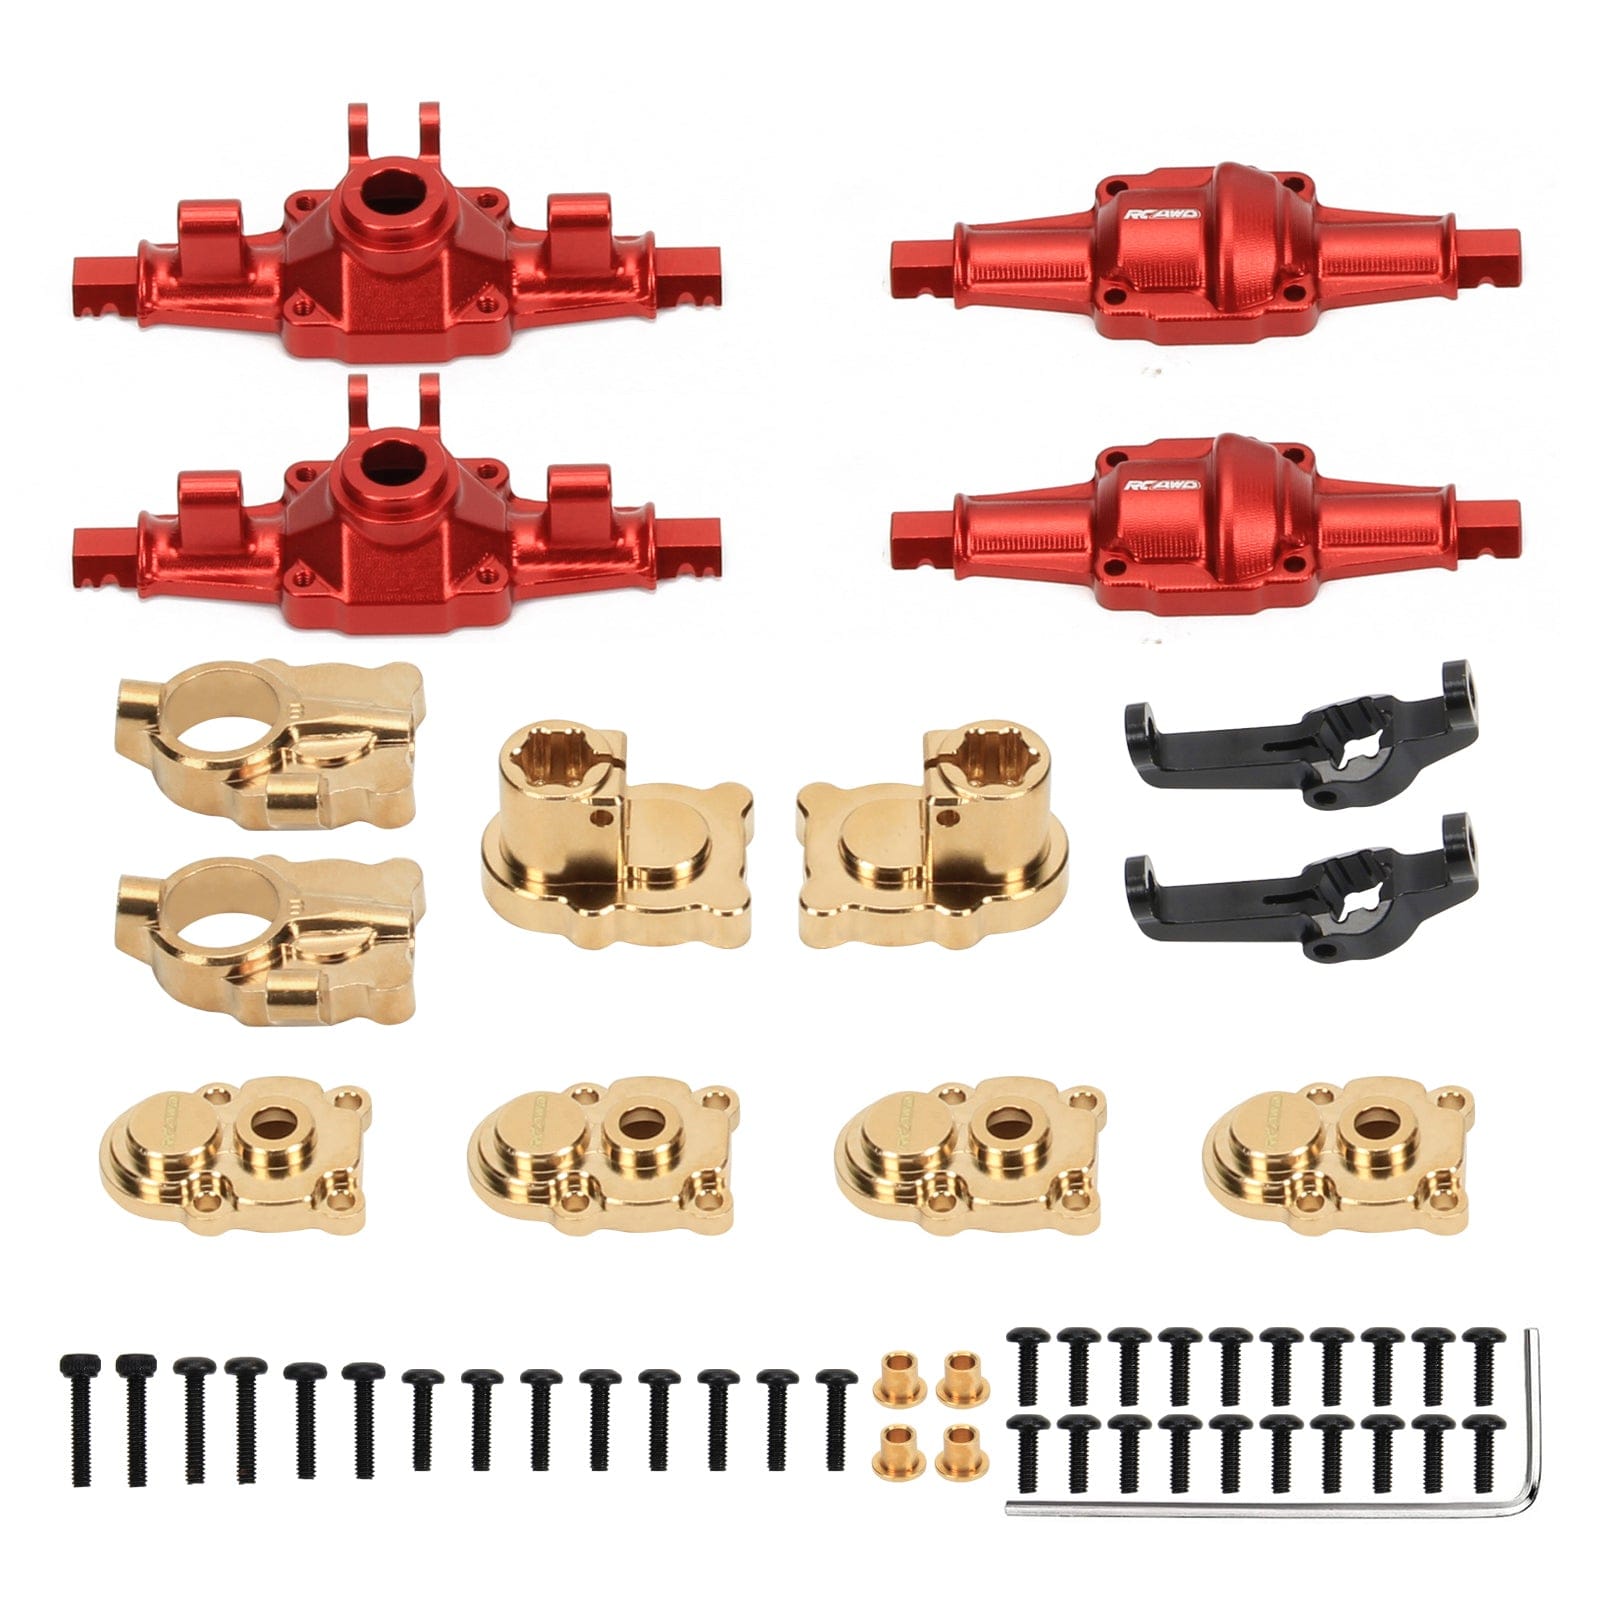 RCAWD FMS FCX24 Yellow+Red / Brass+aluminum alloy front and rear door bridge housing set RCAWD FMS FCX24 Upgrades Aluminum alloy bridge housing